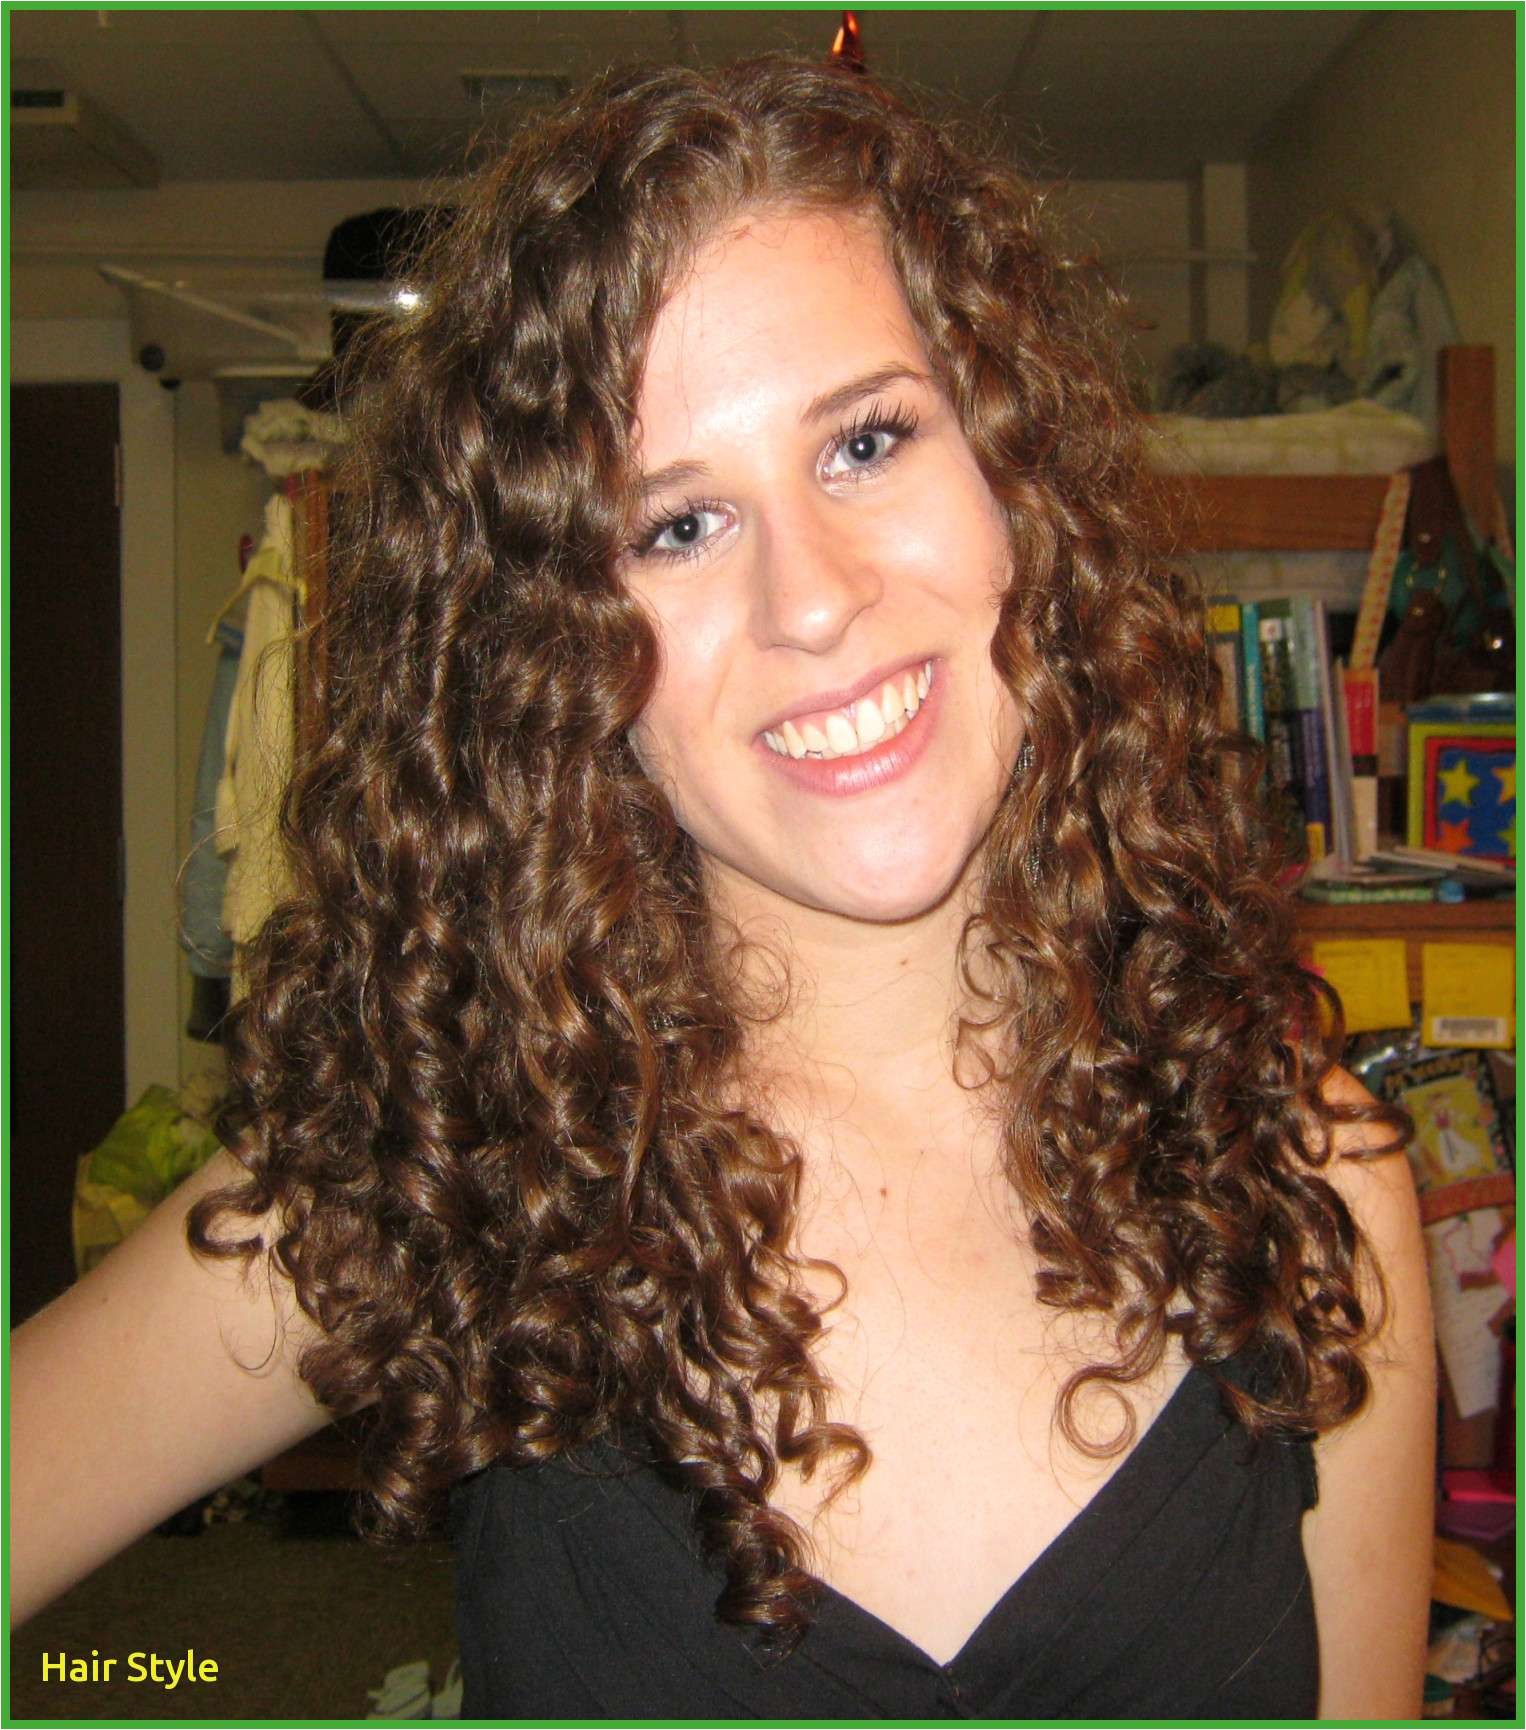 Hairstyle Female Image Unique Hairstyle Long Hair Lovely Very Curly Hairstyles Fresh Curly Hair 0d